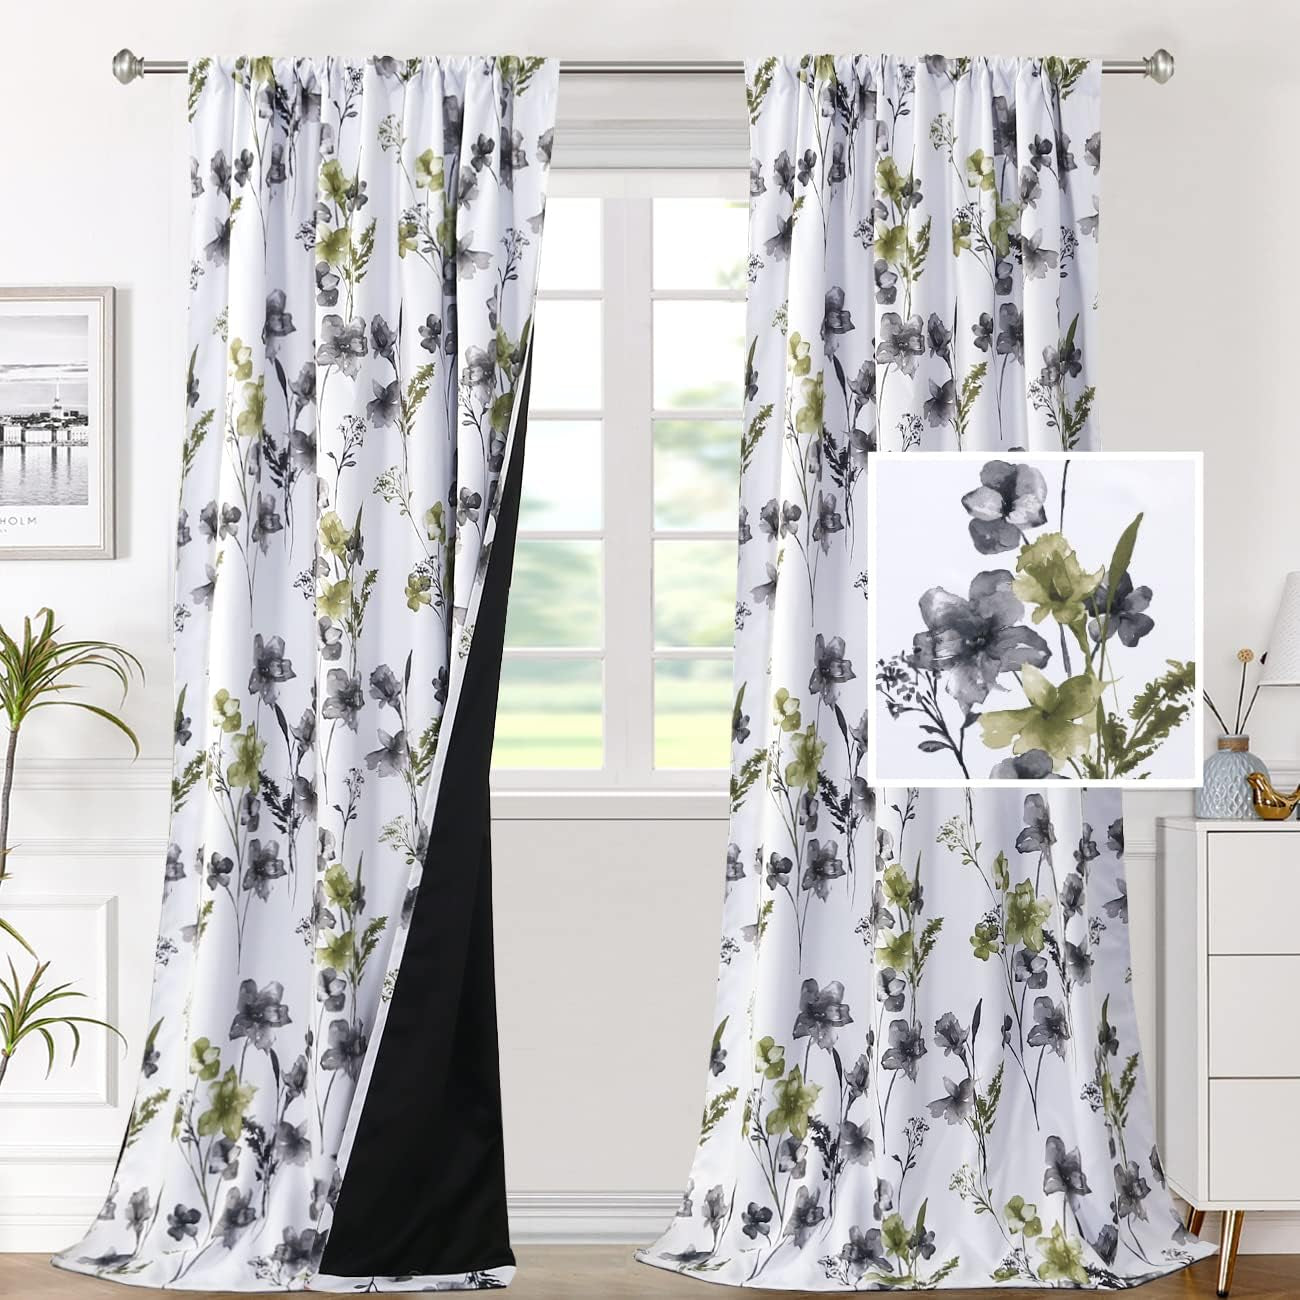 H.VERSAILTEX 100% Blackout Curtains for Bedroom Cattleya Floral Printed Drapes 84 Inches Long Leah Floral Pattern Full Light Blocking Drapes with Black Liner Rod Pocket 2 Panels, Navy/Taupe  H.VERSAILTEX Grey/Olive 52"W X 96"L 